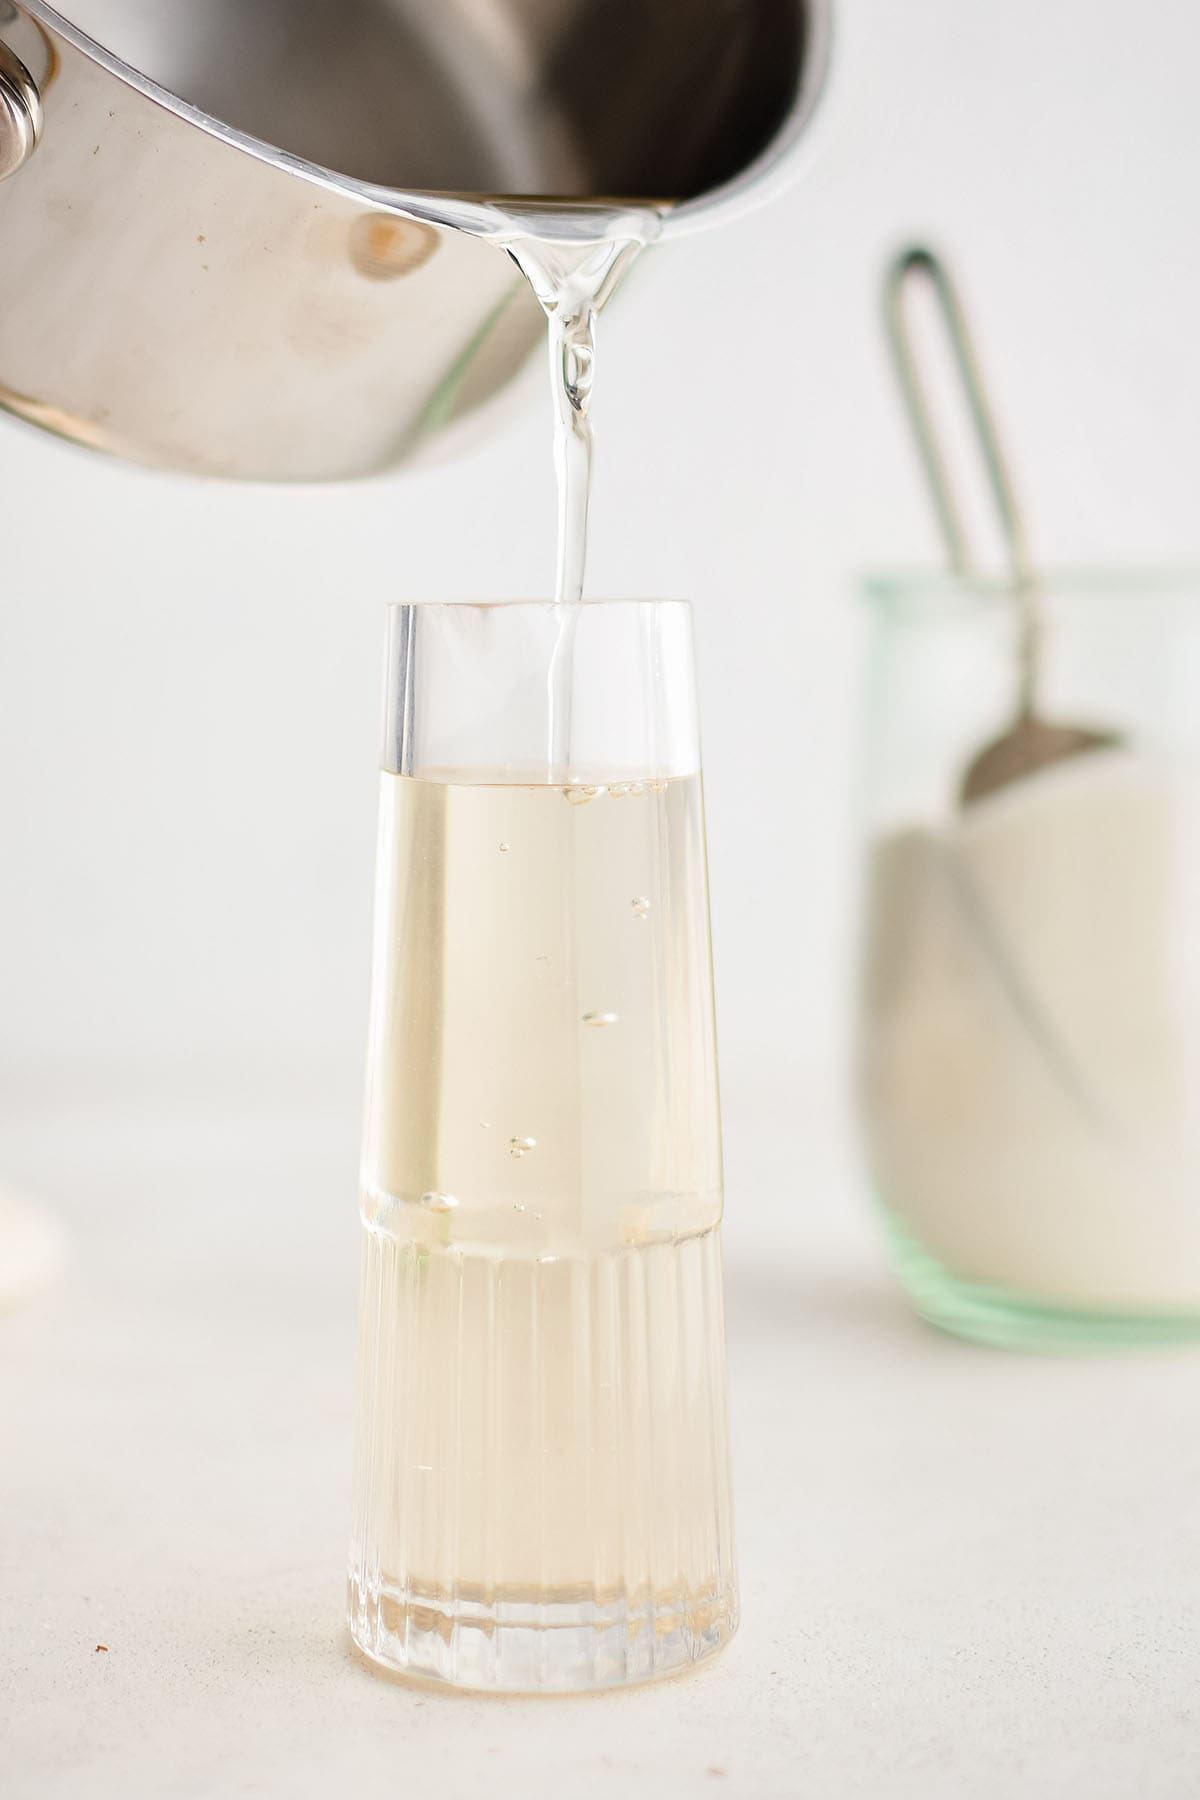 photo showing simple syrup being poured intoa bottle